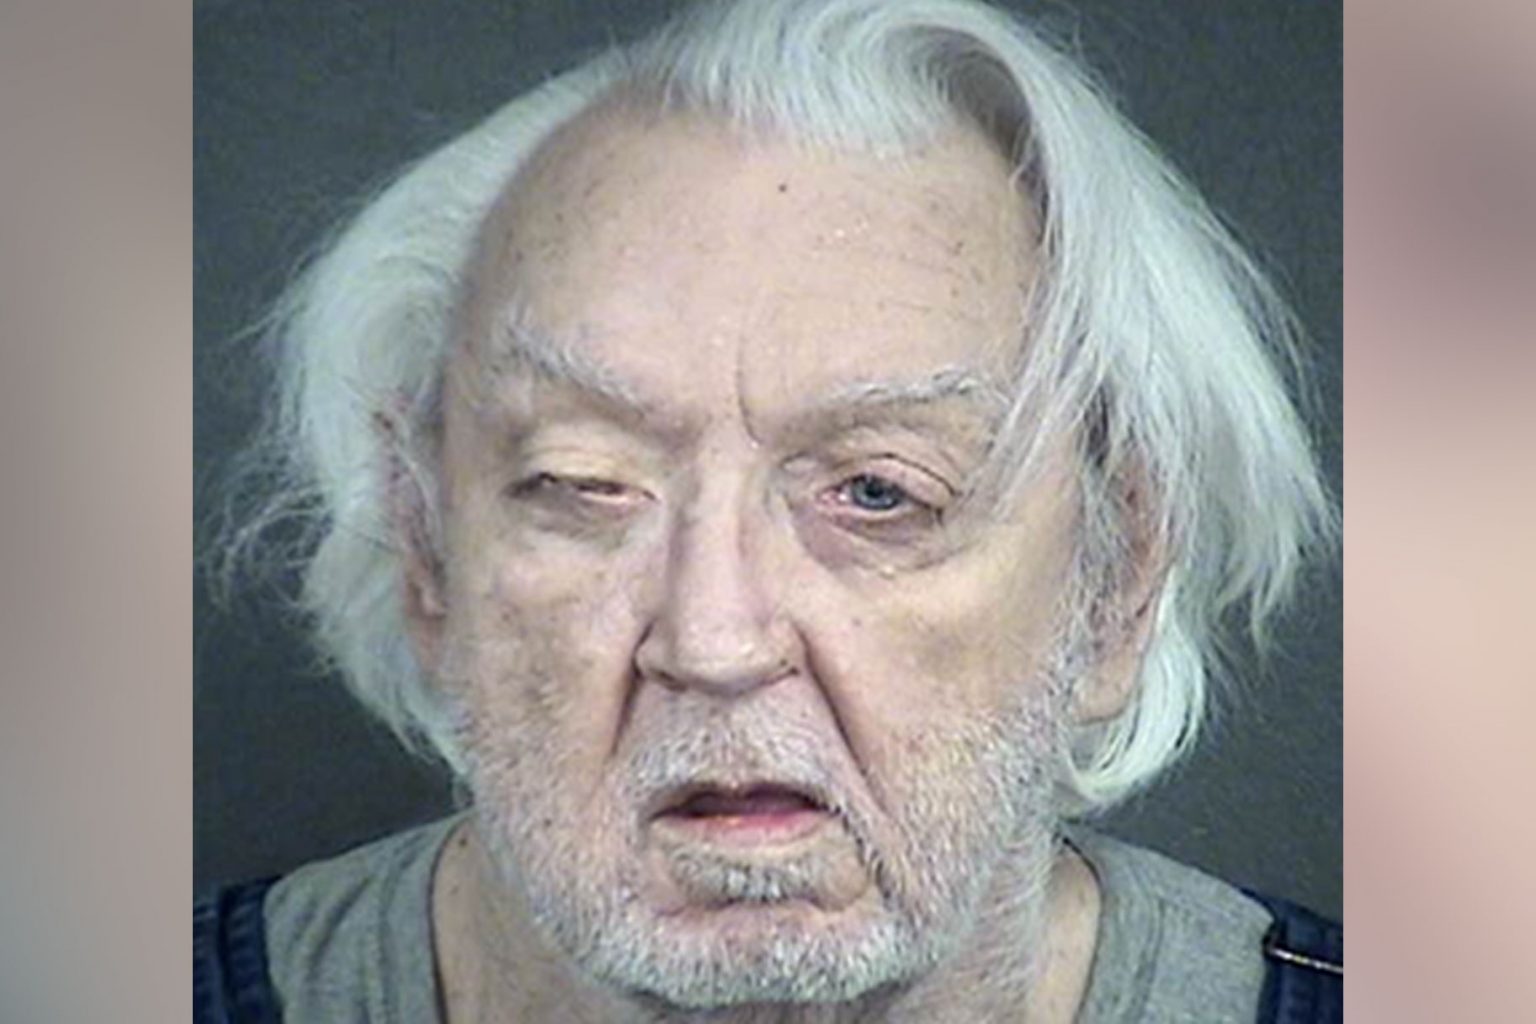 Kansas Man Arrested For 1983 Murder That Was Falsely 